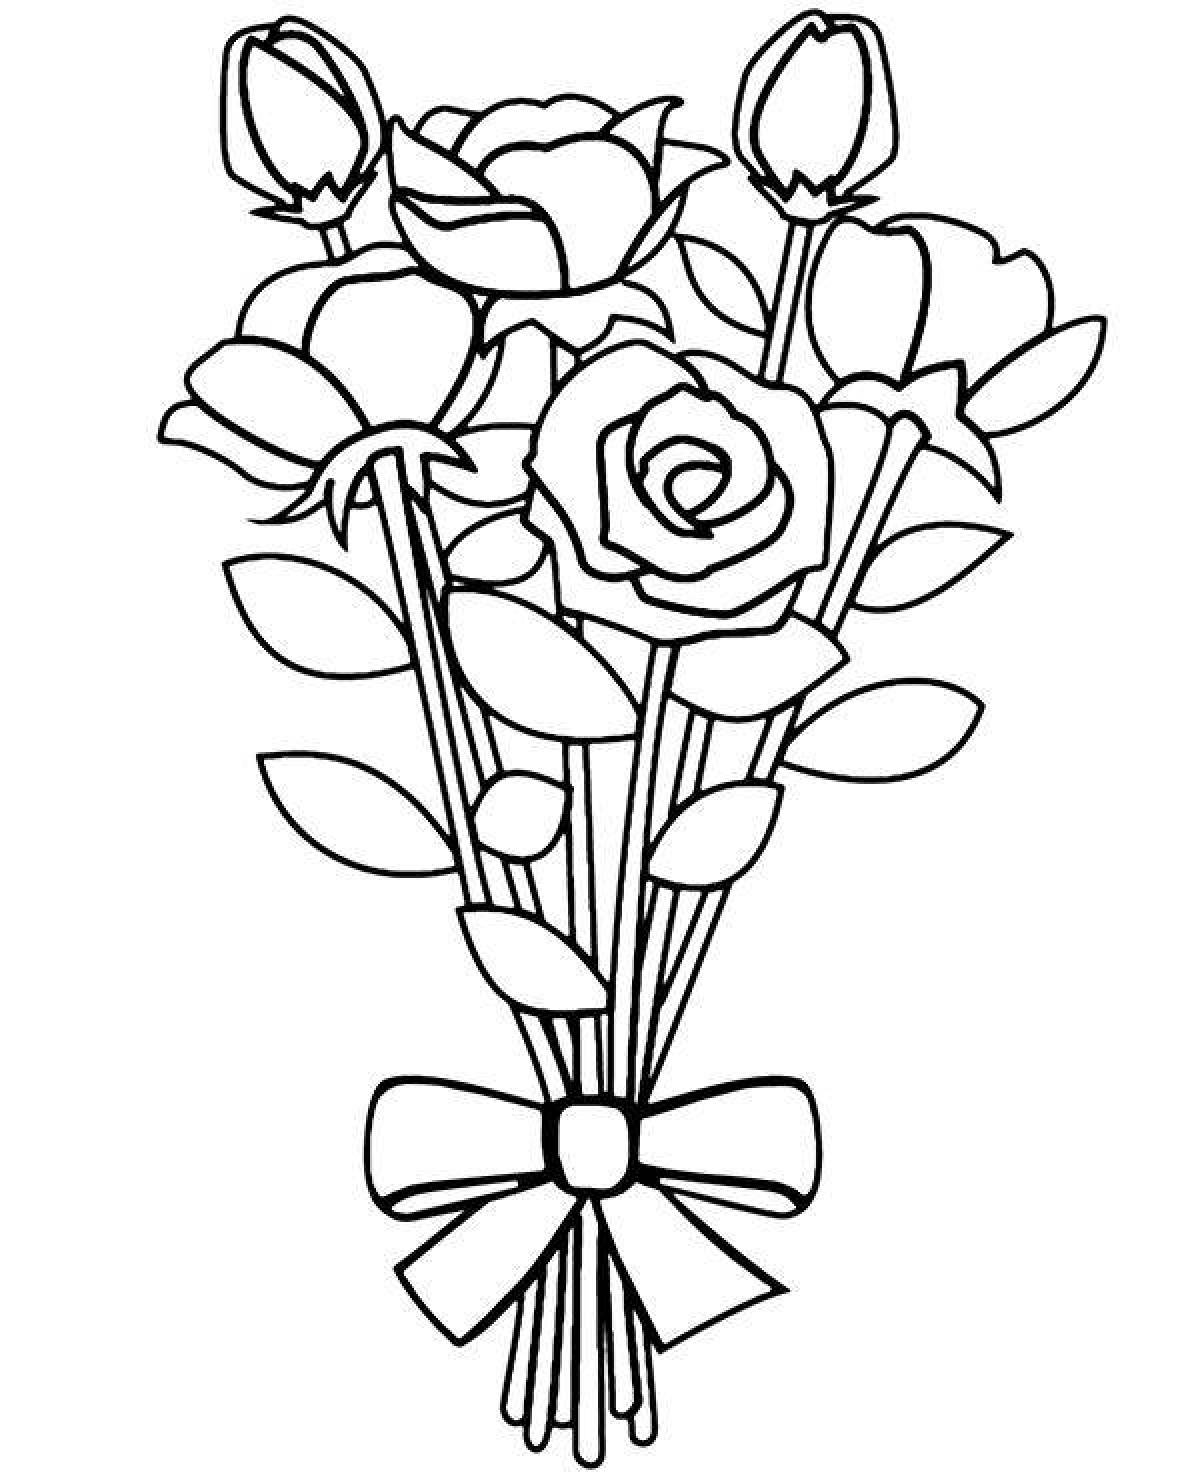 Coloring page dazzling bouquet of roses